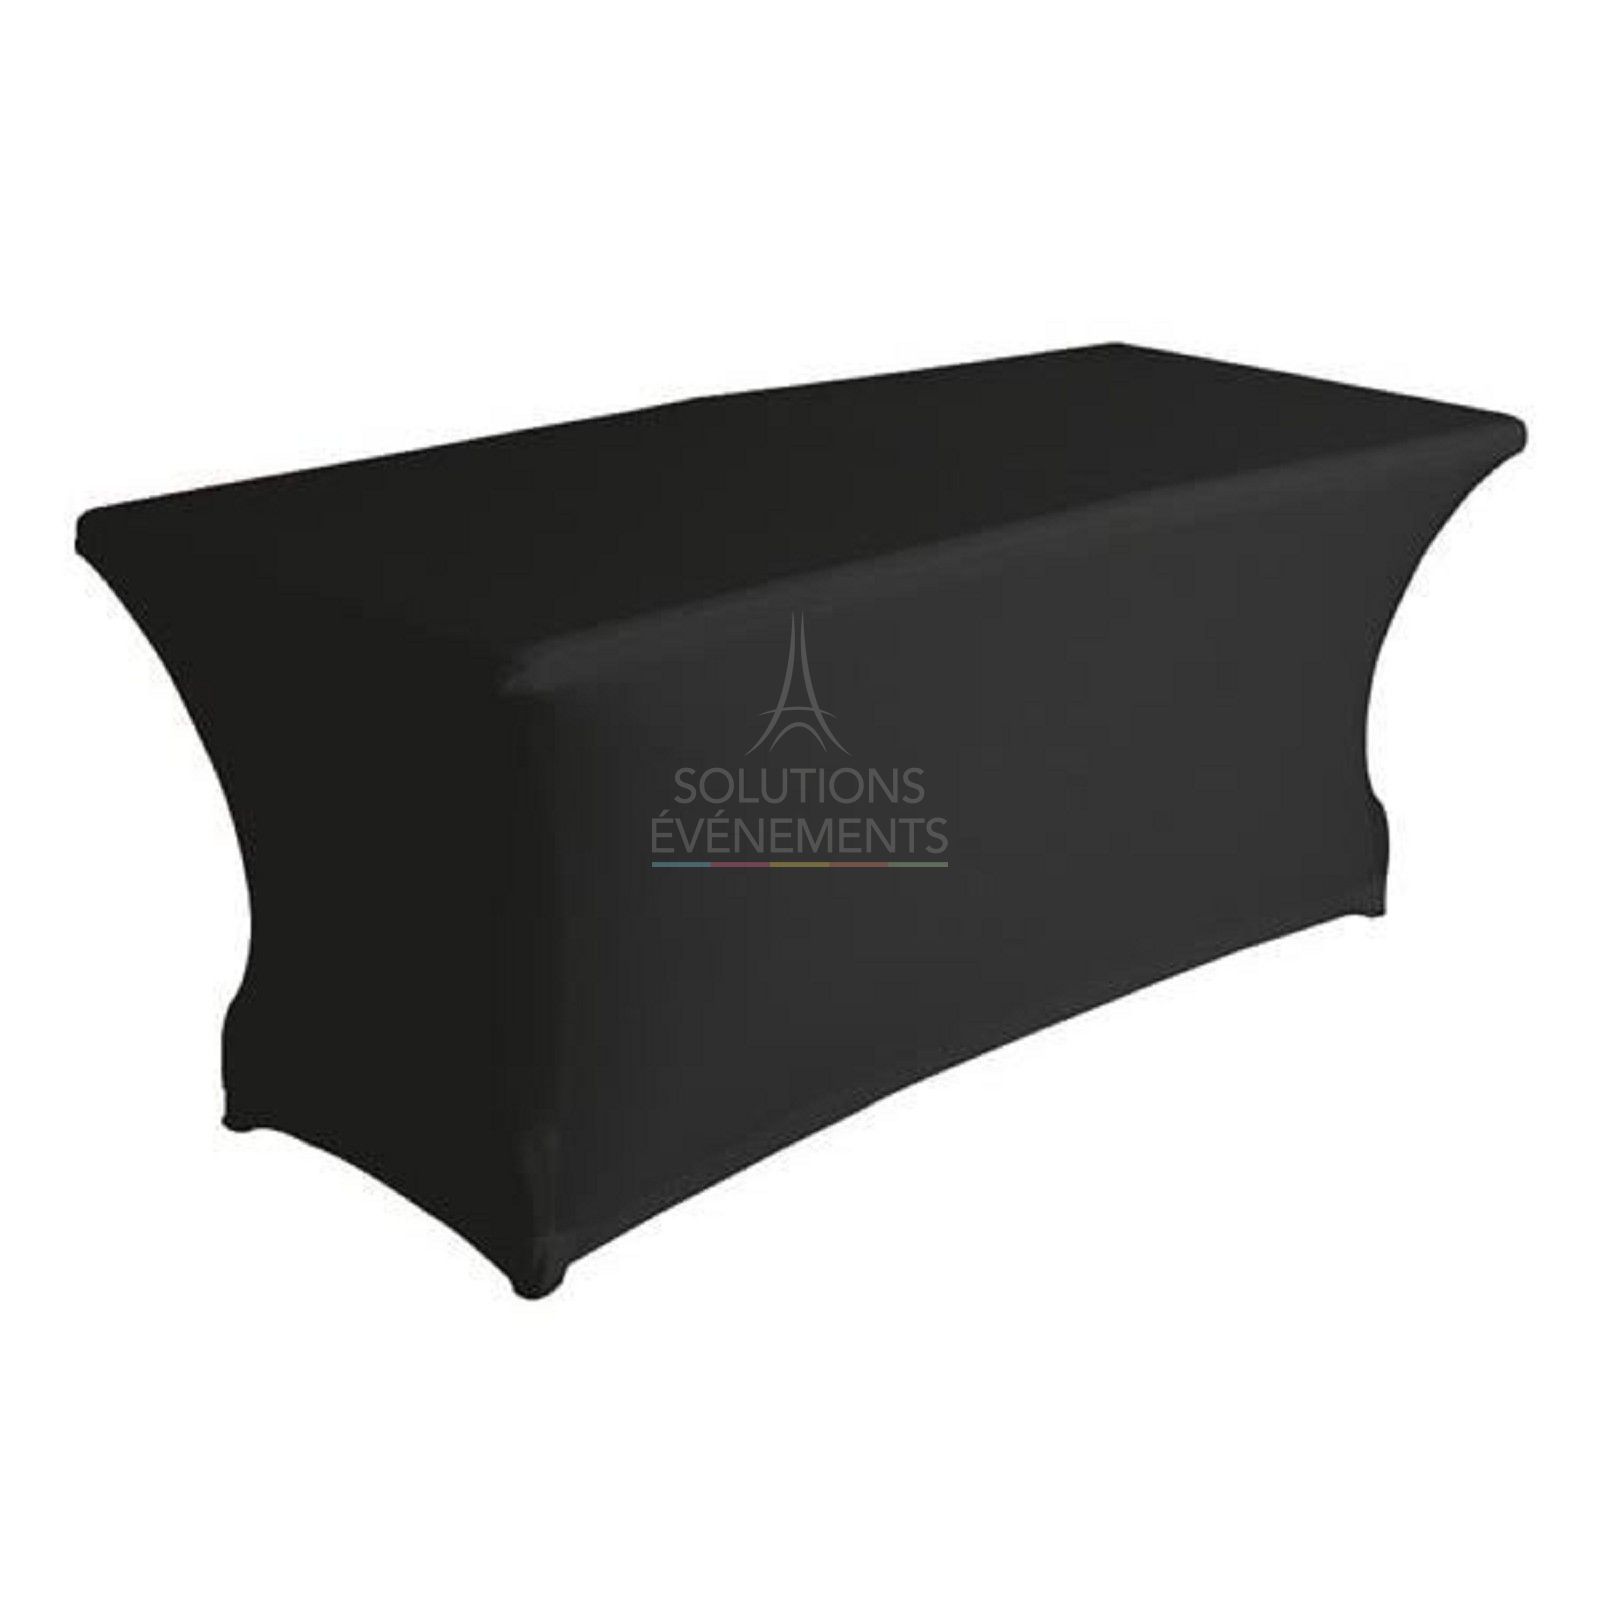 Rental of rectangle table with black cover. For approximately 8 people